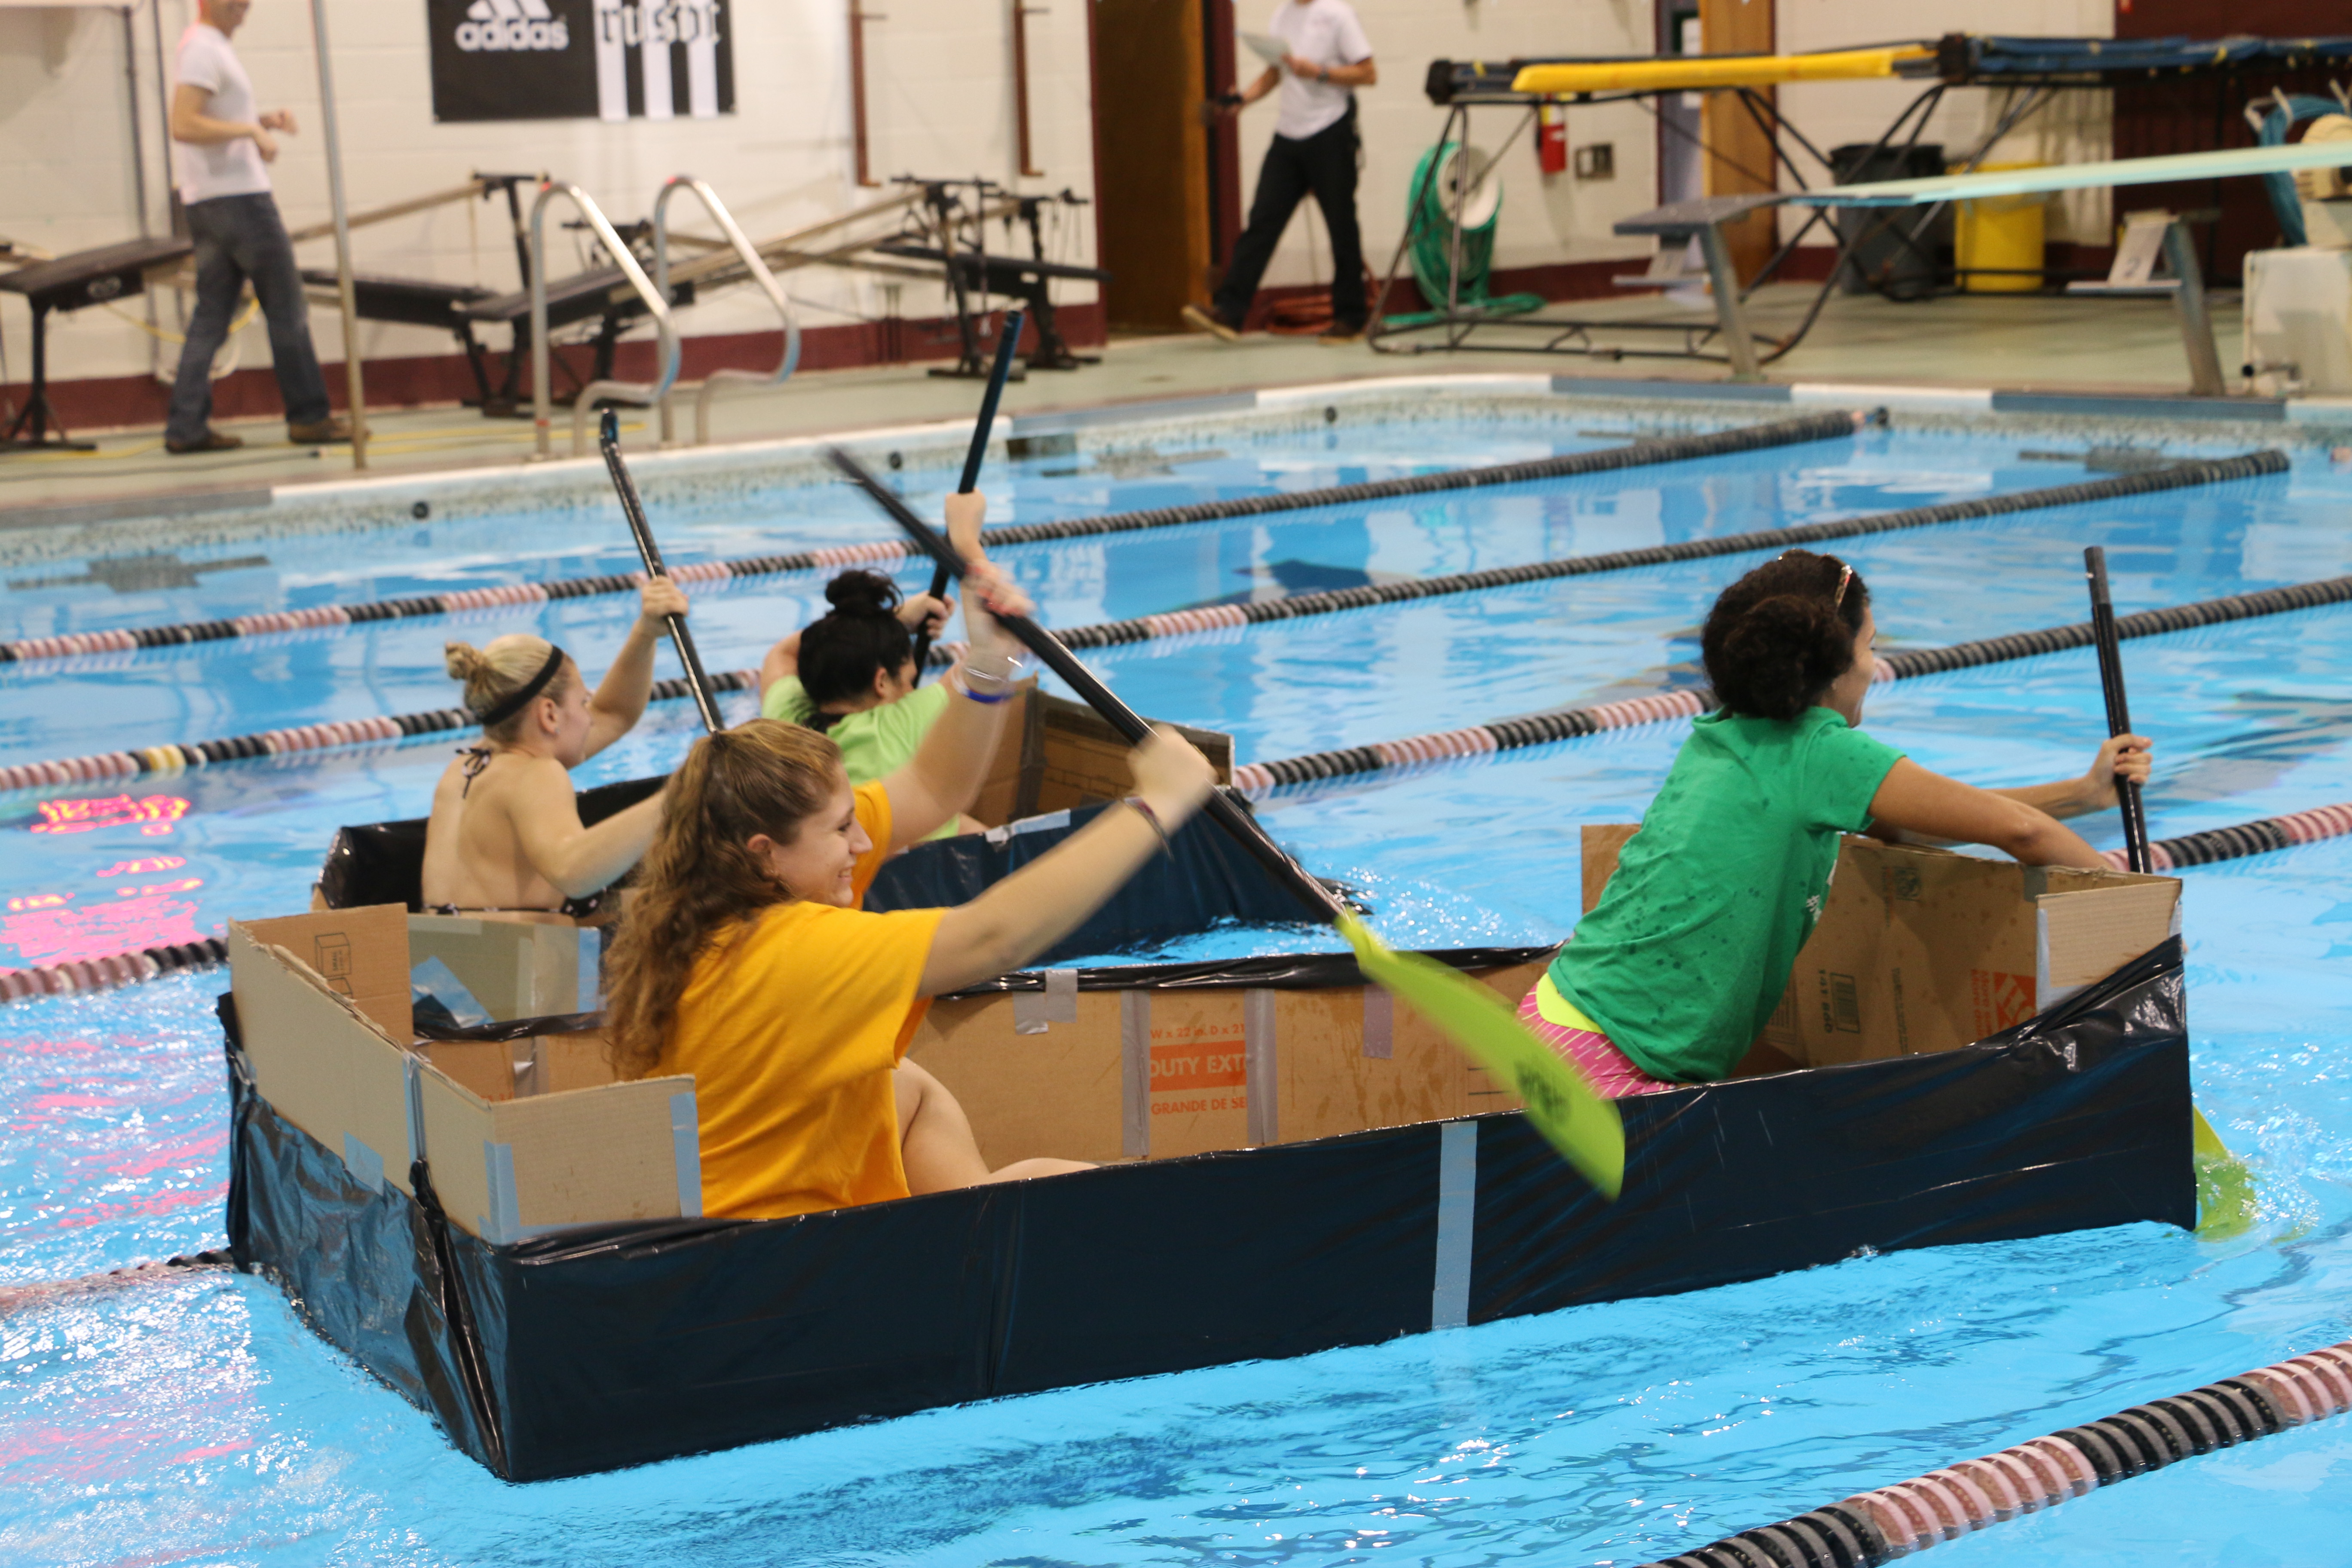 Students paddle in a cardboard boat across pool.